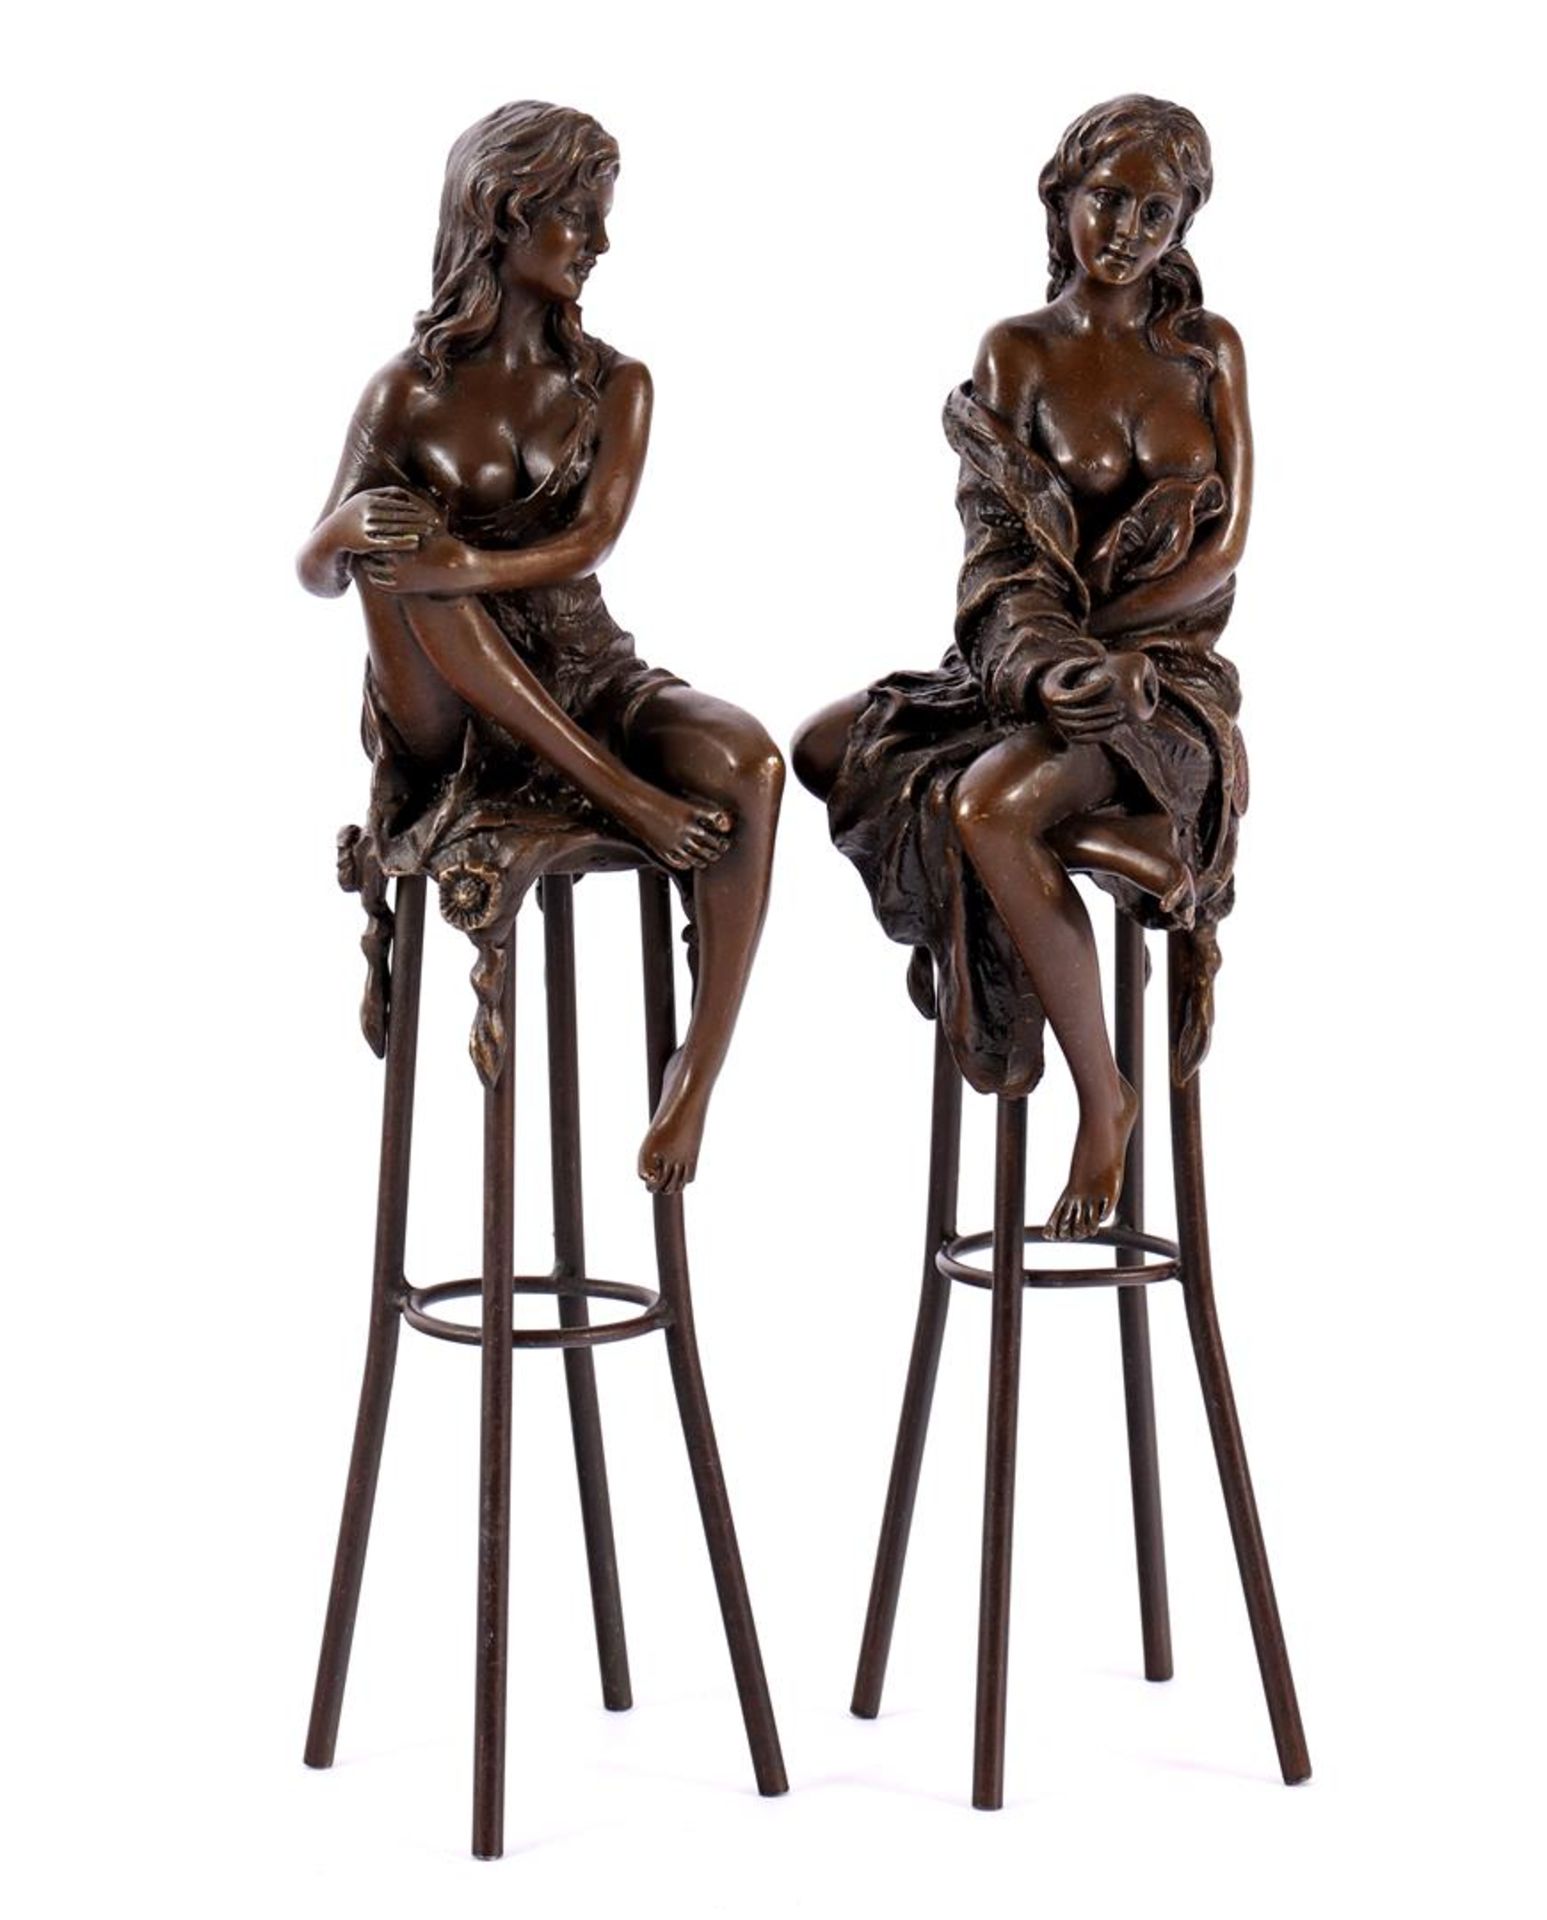 2 bronze sculptures of seated ladies on a stool